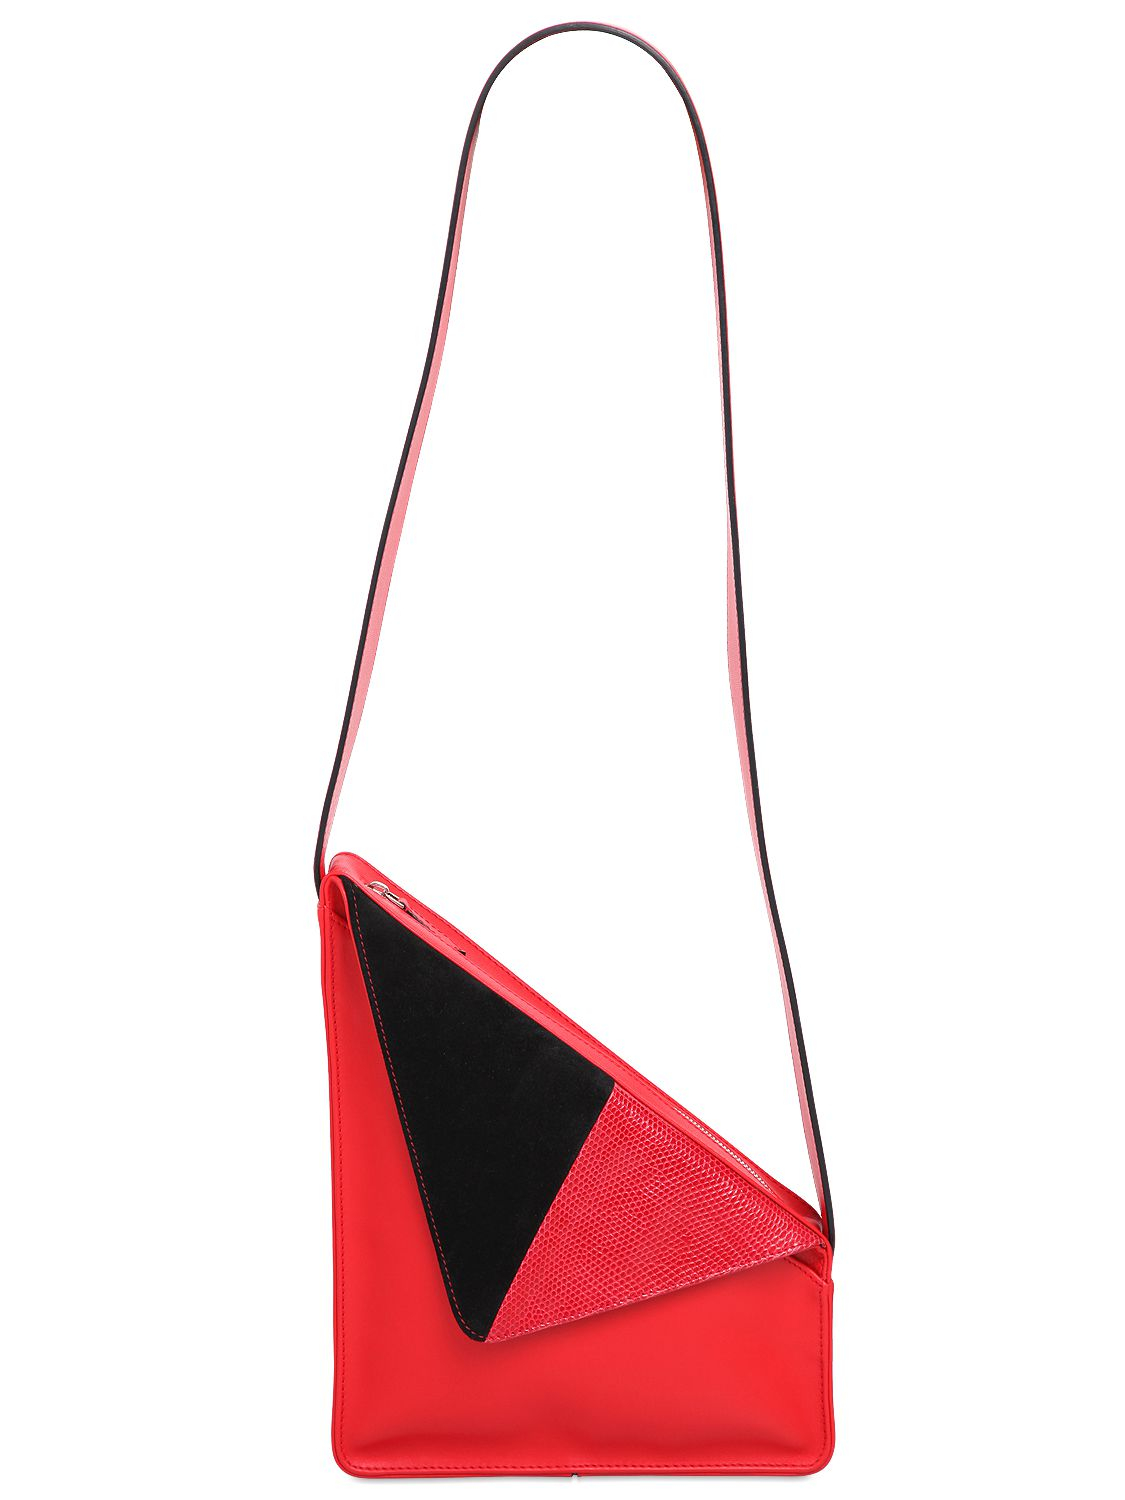 celine classic bag price - J.w. anderson Triangle Leather Shoulder Bag in Red | Lyst